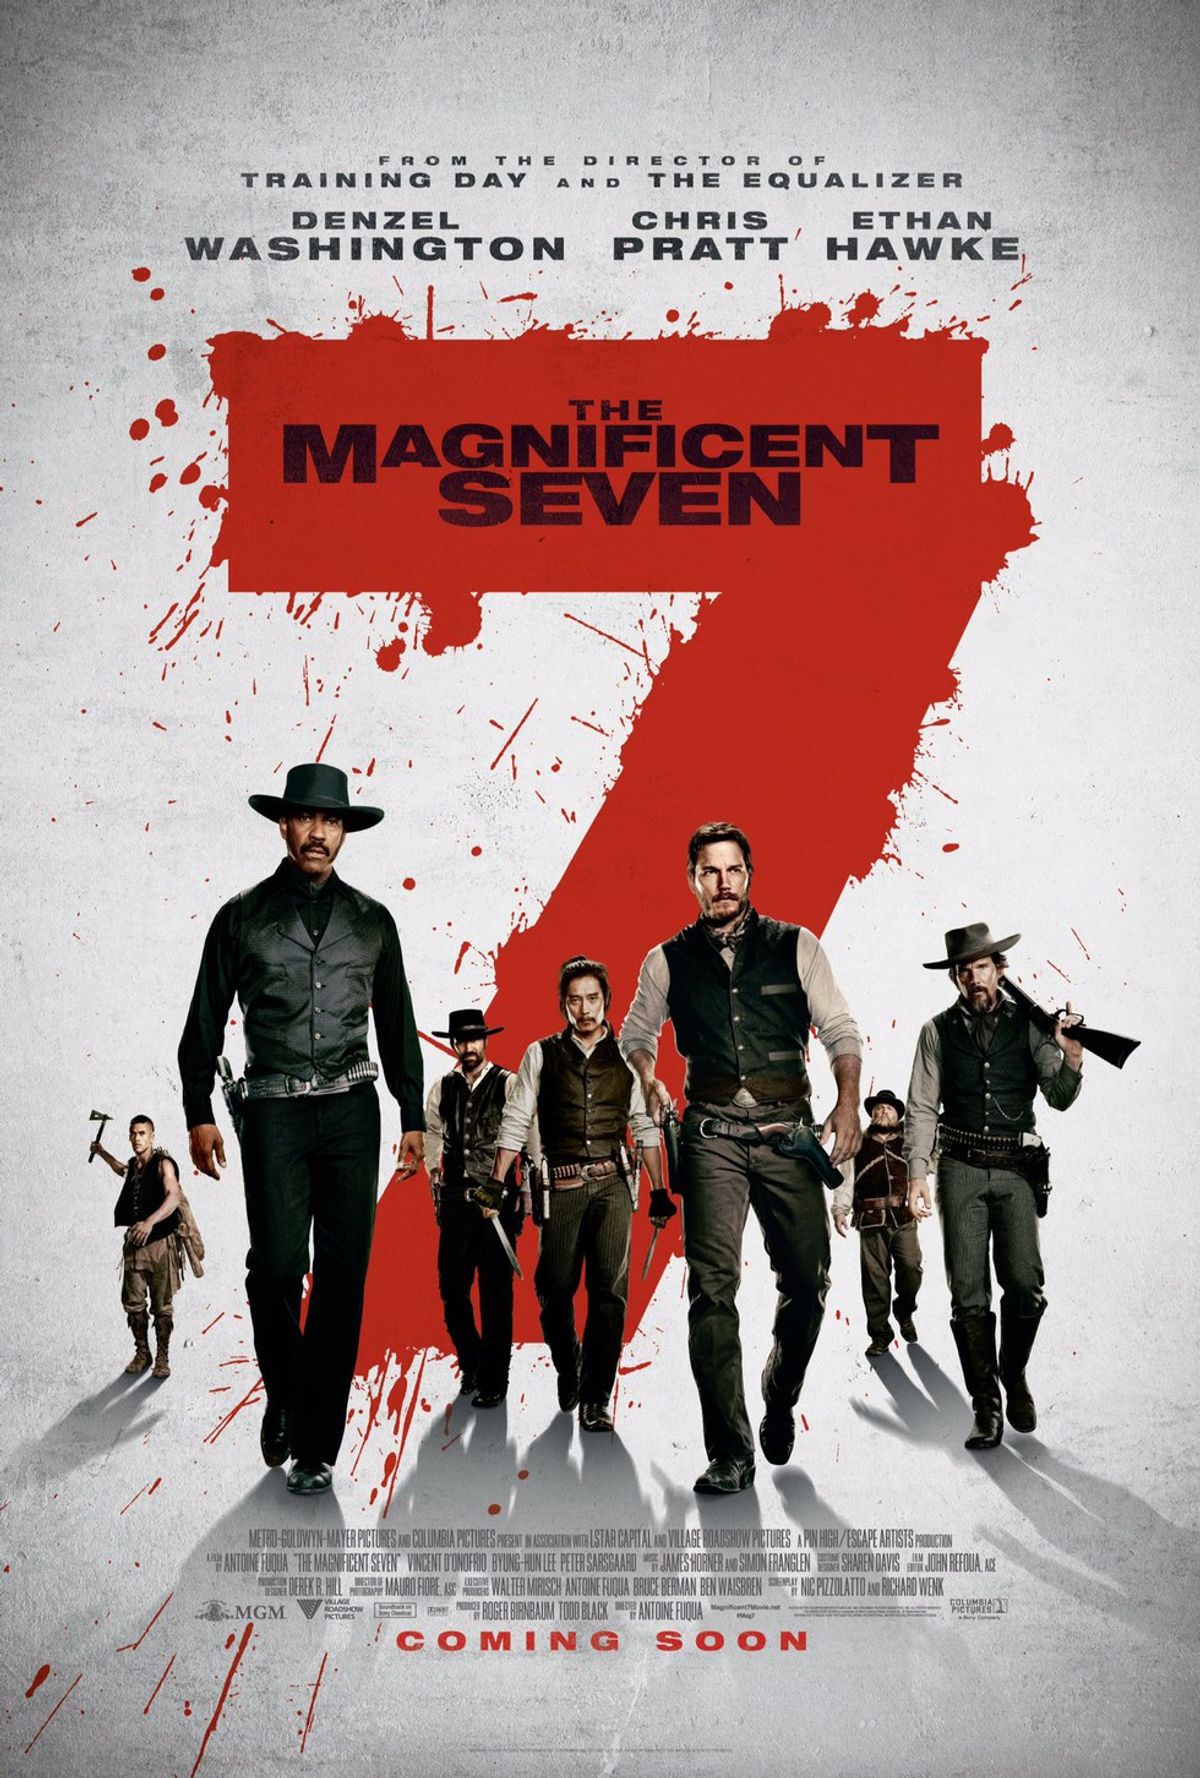 The Magnificent Seven: A Review